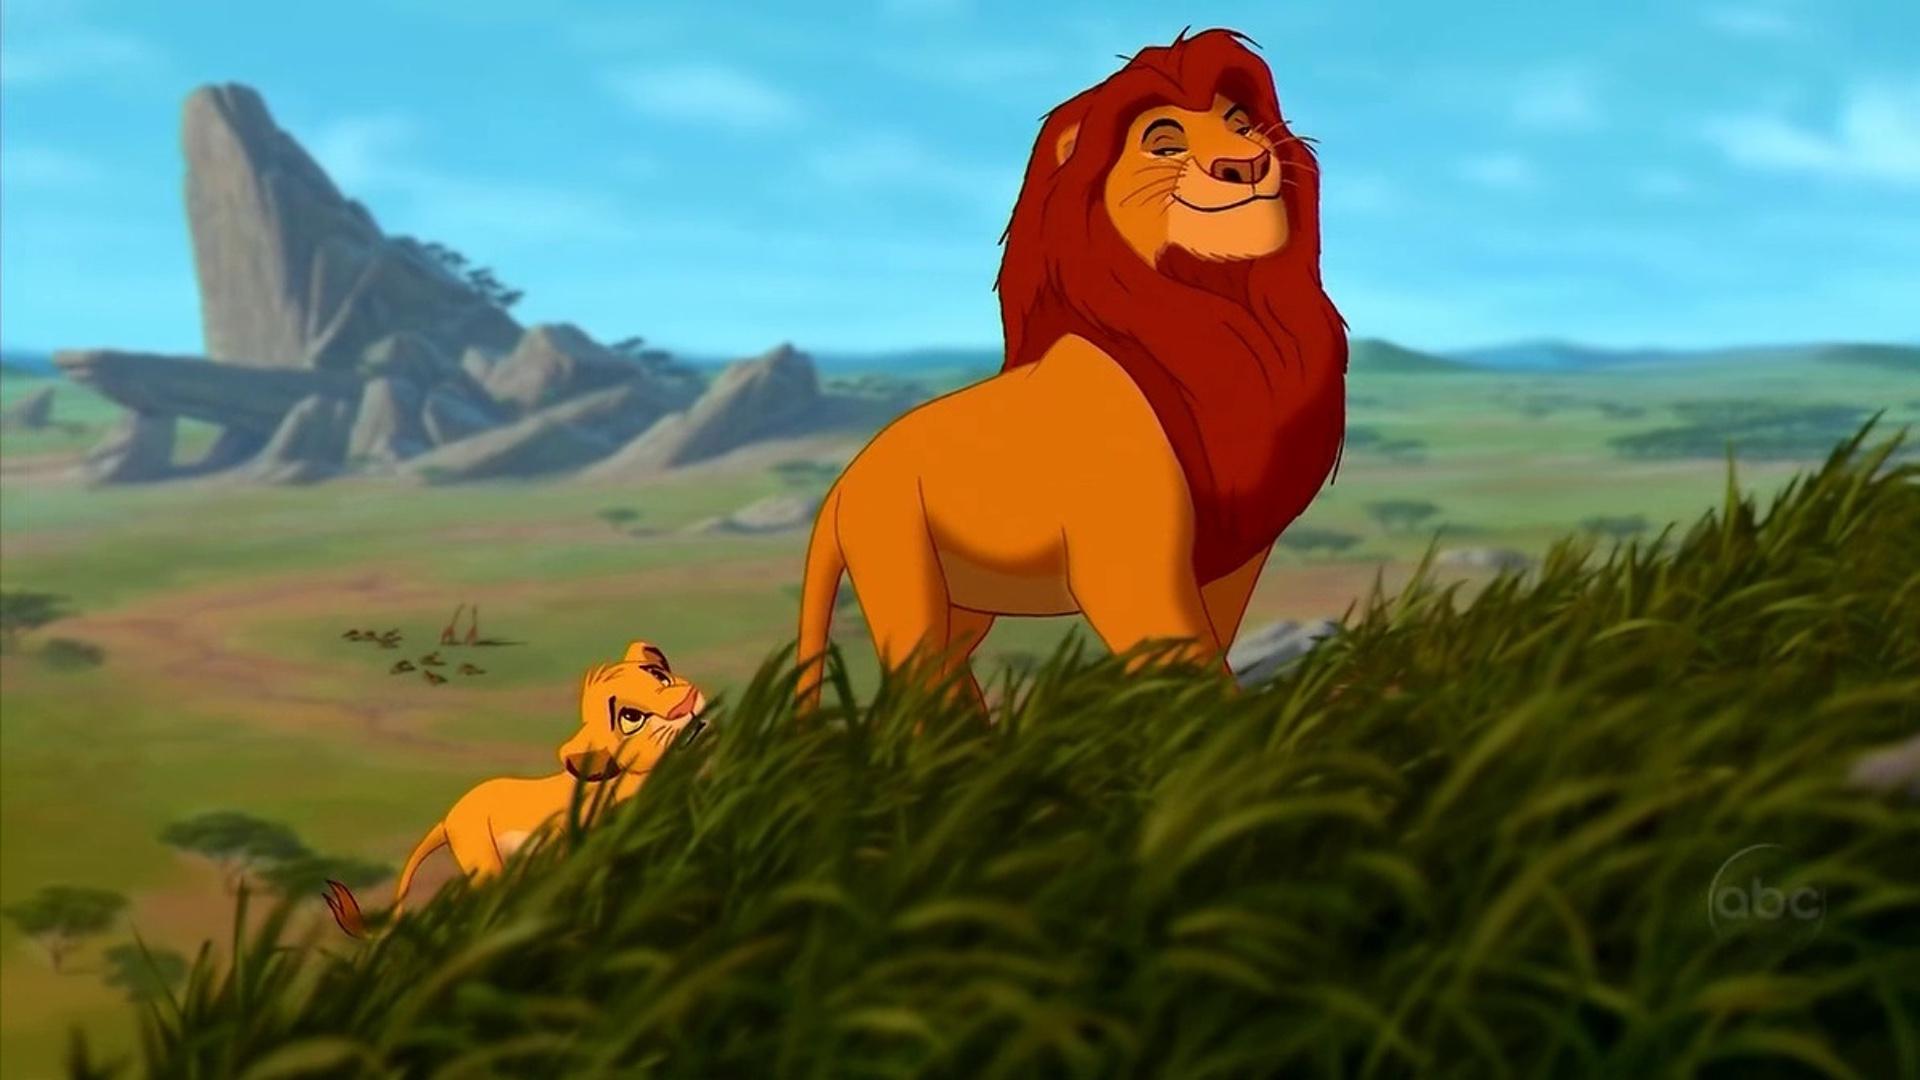 Donald Glover to Play Simba in THE LION KING with James Earl Jones